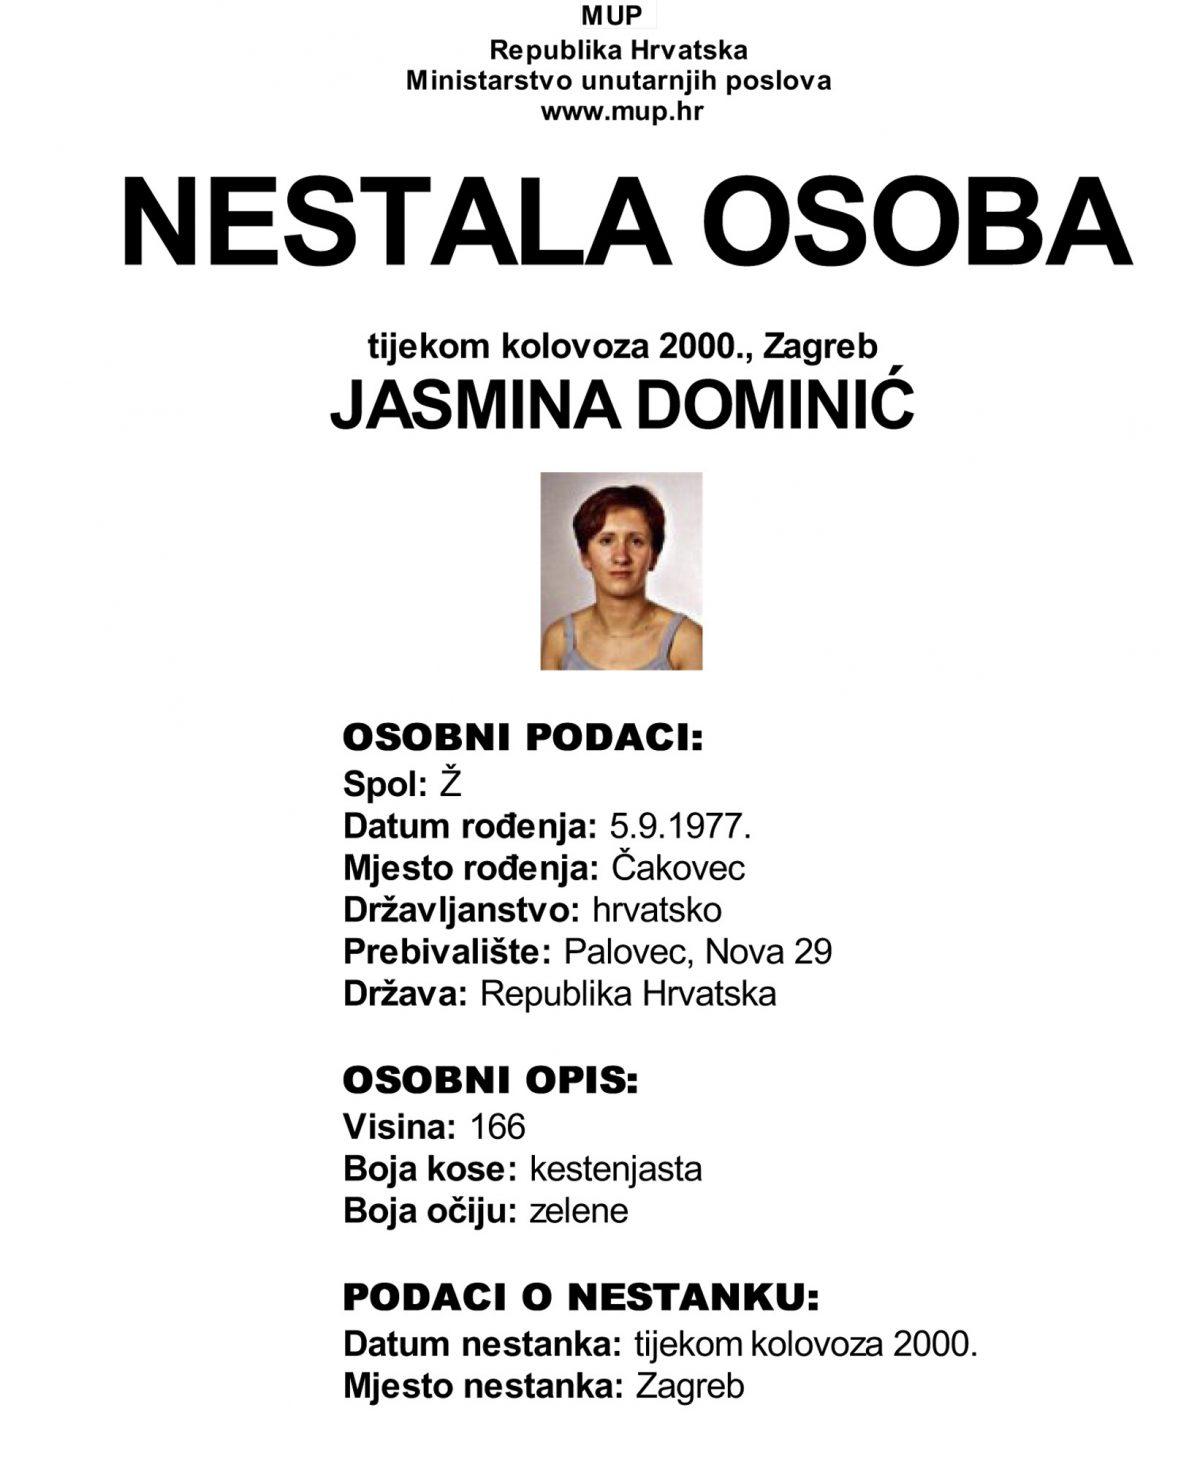 This screenshot provided by the Croatian Interior Ministry on Monday, Feb. 18, 2019 shows a missing persons information sheet Jasmina Dominic who was reported missing in 2005 but was last seen in 2000. (Croatian Interior Ministry via AP)